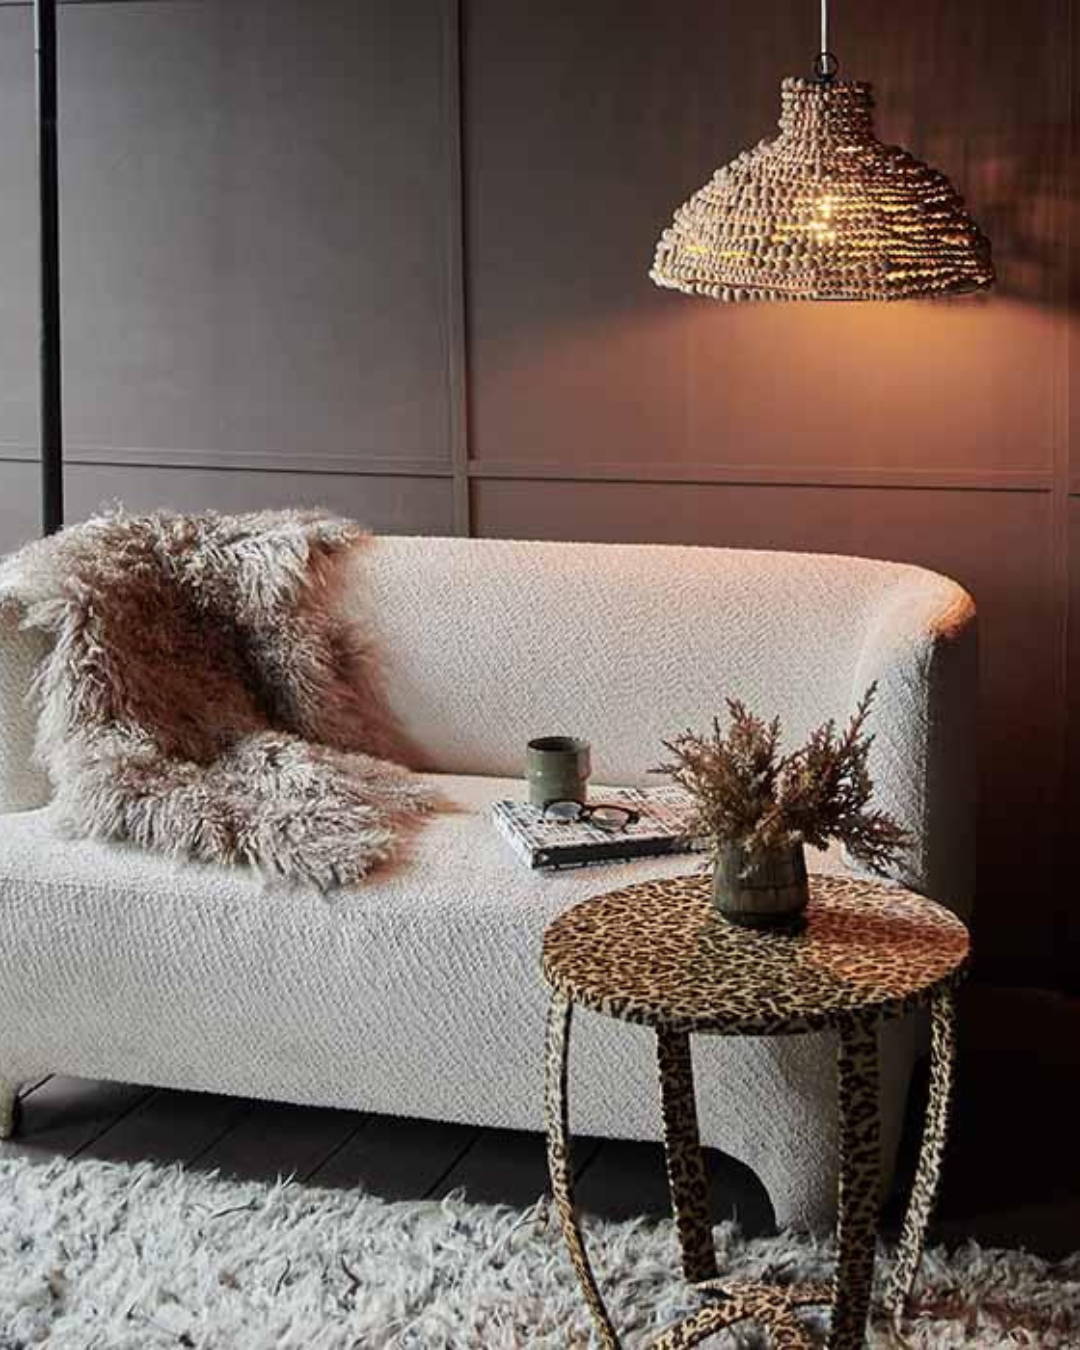 A curved cream sofa draped with a sheepskin throw next to a table that has a leopard print pattern and housing a plant with a beaded chandeliier